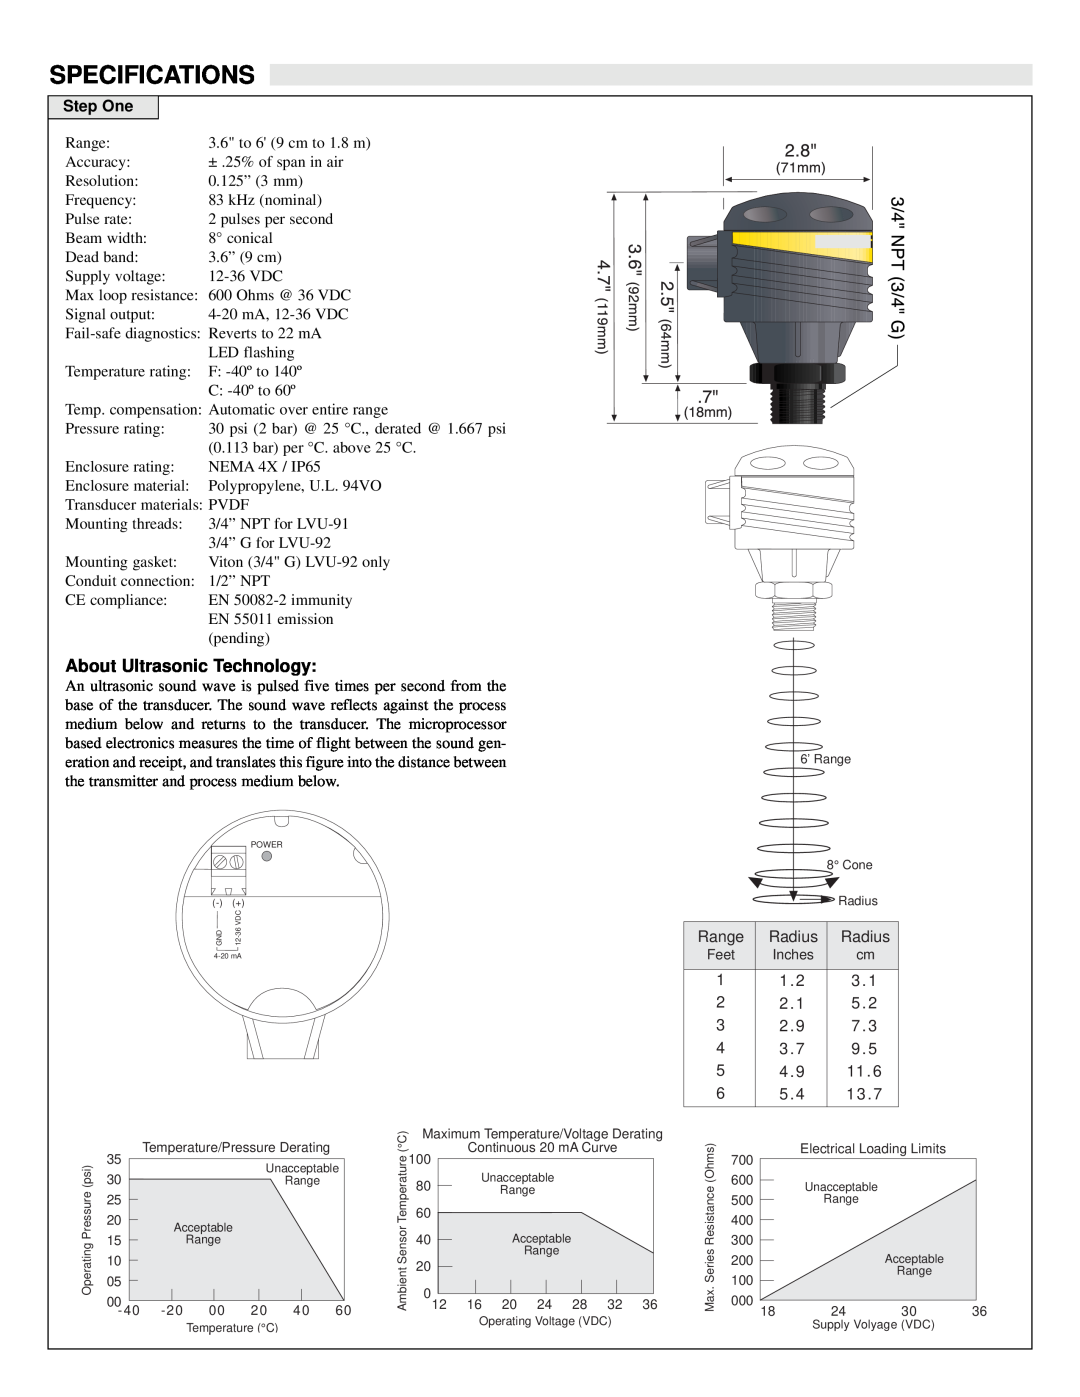 Omega Engineering LVU-90 warranty Specifications, About Ultrasonic Technology, Step One 